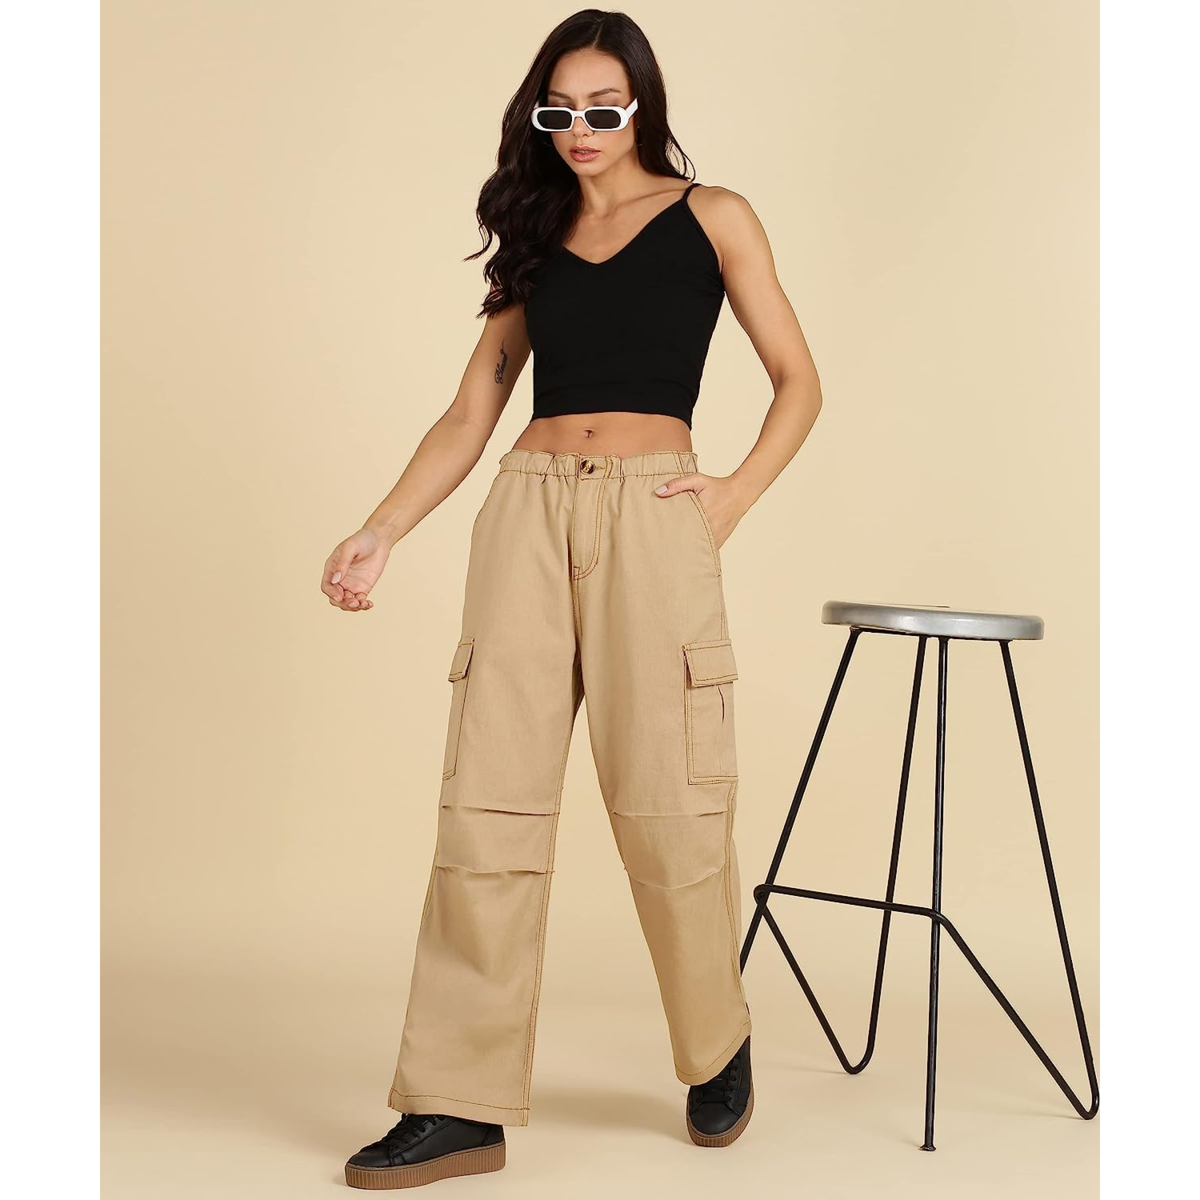 Trending Wholesale cargo army pants for girls At Affordable Prices